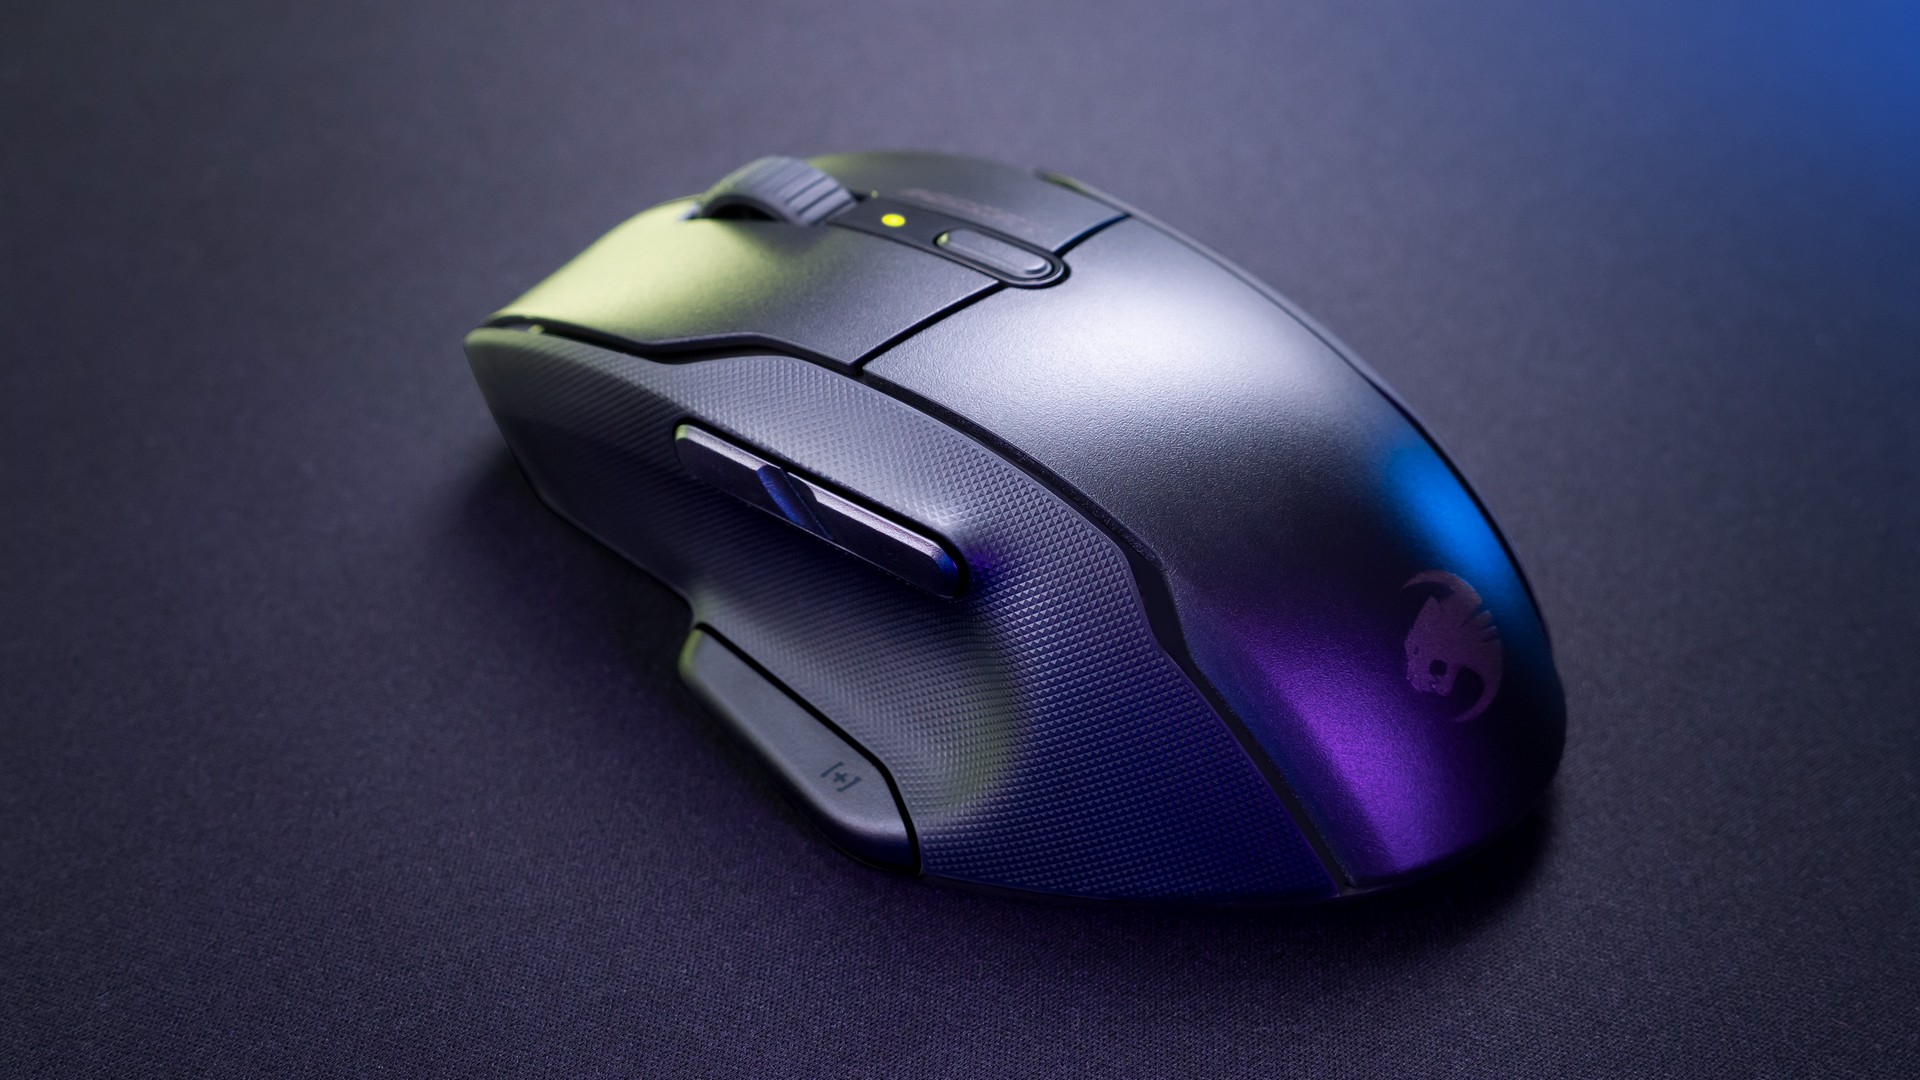 ROCCAT Reveals The New KONE AIR Wireless PC Gaming Mouse